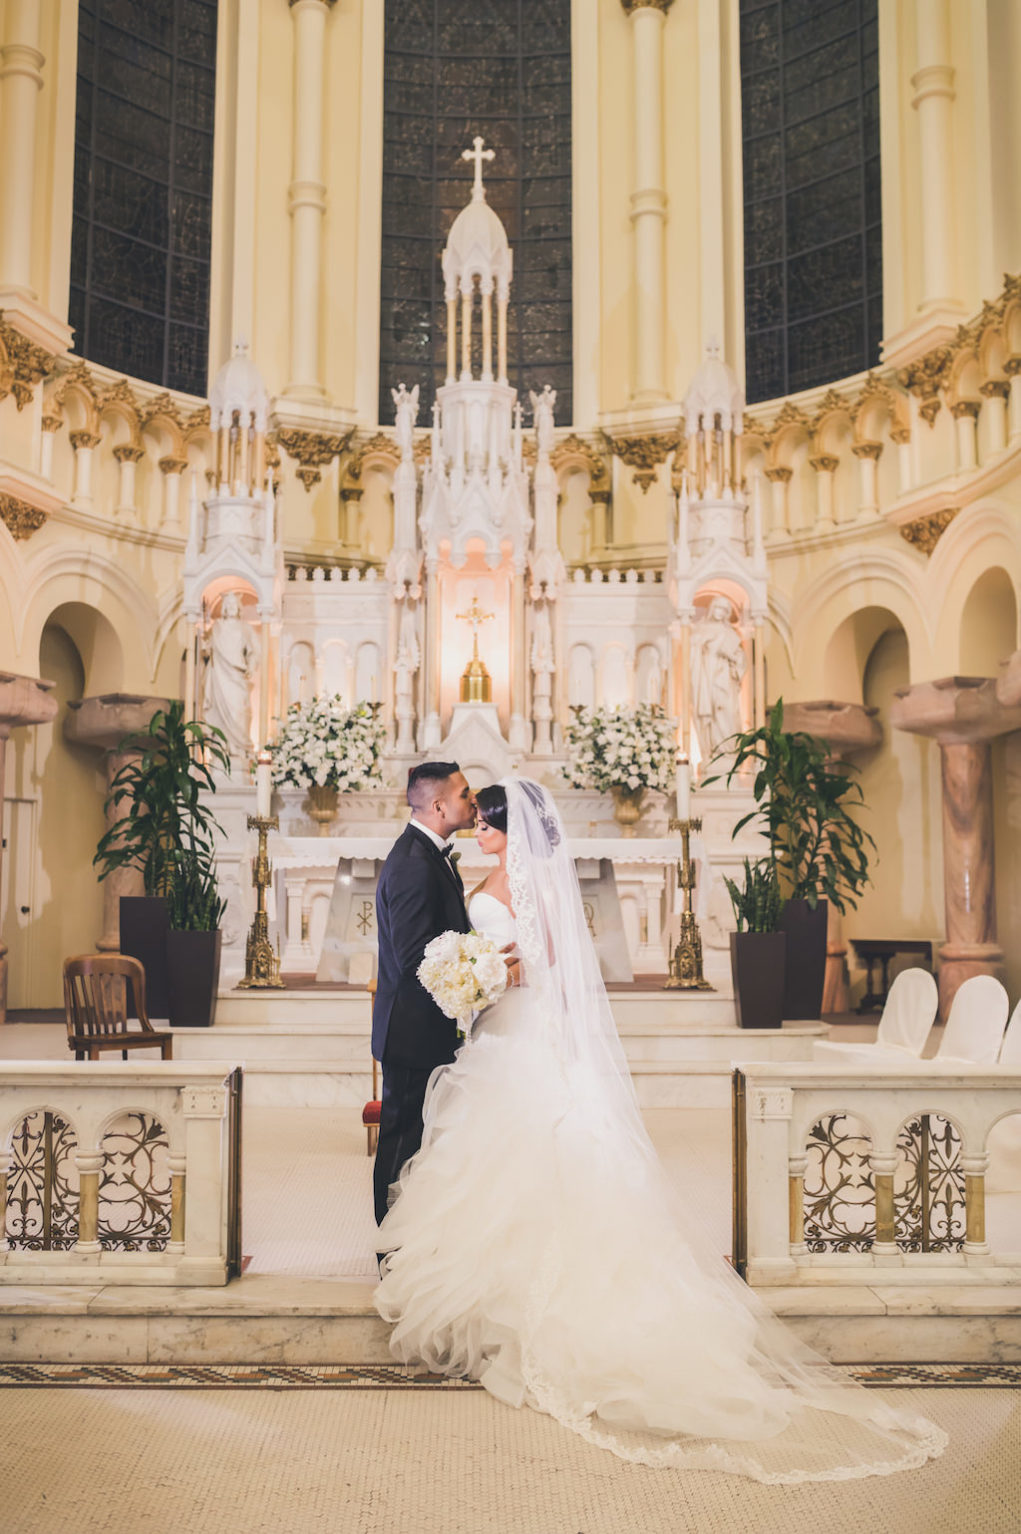 Traditional Church Wedding Ceremony, With White and Greenery Flower Arrangements Bride in Pronovias Layered Mermaid Strapless Dress | Downtown Tampa Wedding Ceremony Venue Sacred Heart Catholic Church | Planner Special Moments Event Planning